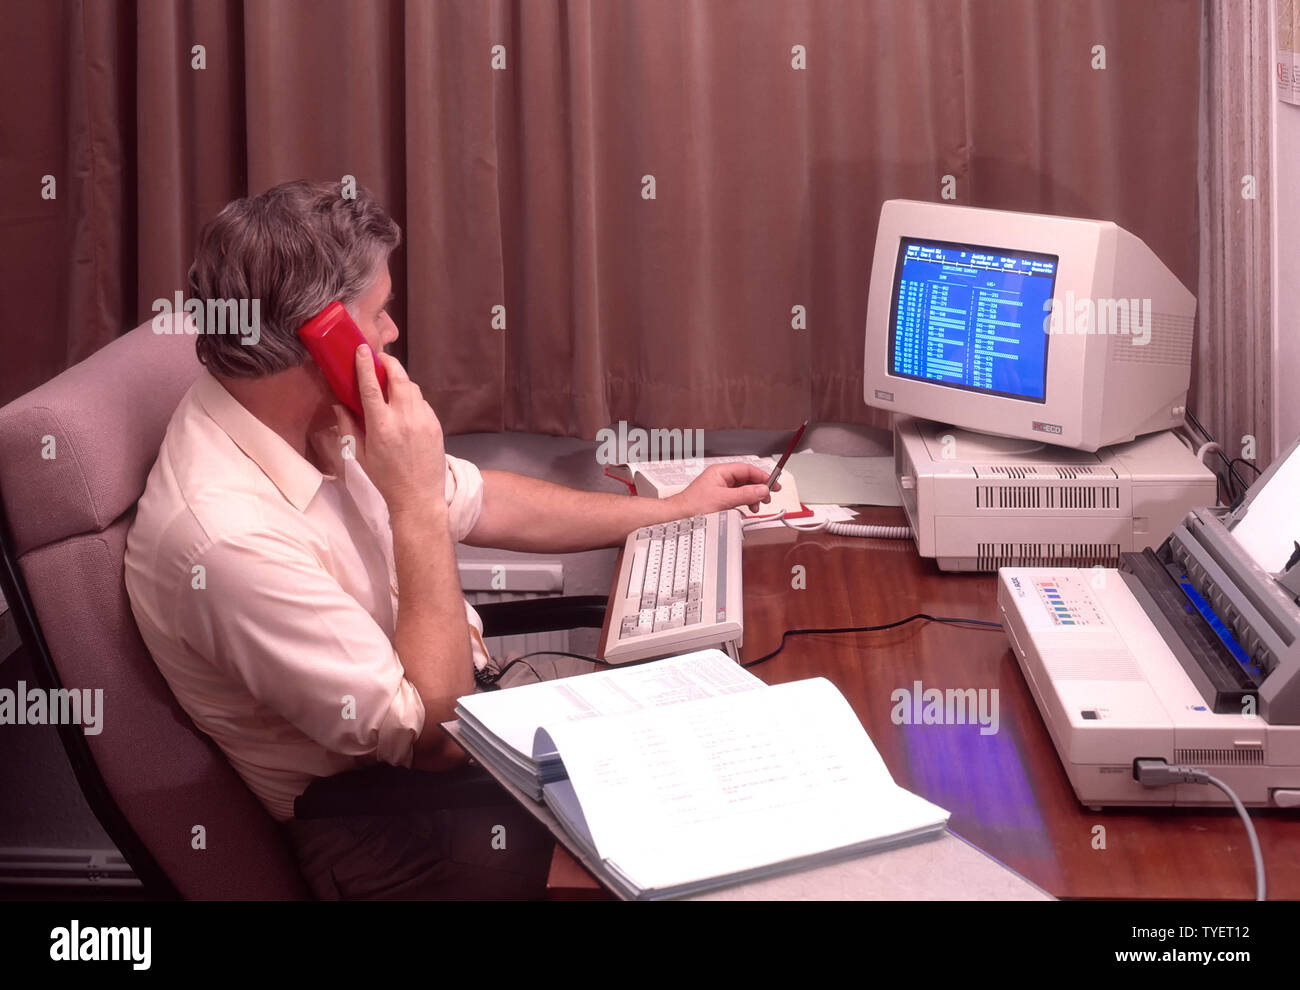 Historical 1988 archive image self employed male office worker man sitting at desk working late from home curtains drawn closed using red landline phone Amstrad desktop computer blue screen & printer archive 1980s the way we were WFH in England UK in the 80s Stock Photo